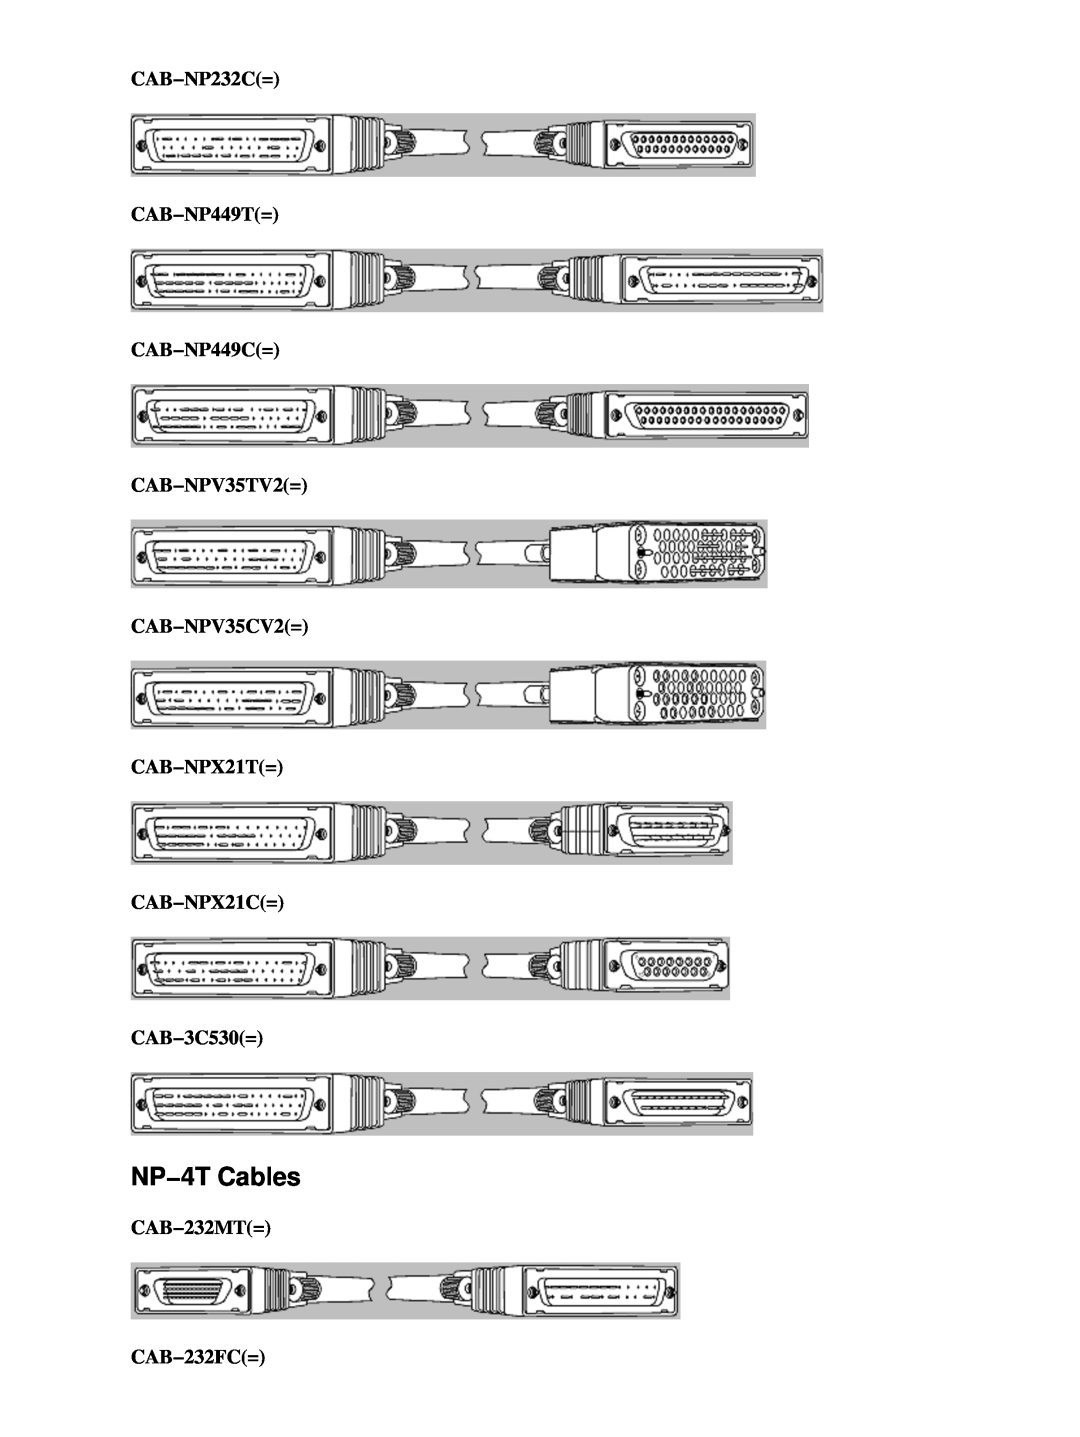 Cisco Systems 3000 Series manual NP−4T Cables, CAB−NP232C= CAB−NP449T= CAB−NP449C= CAB−NPV35TV2= CAB−NPV35CV2=, CAB−232MT= 